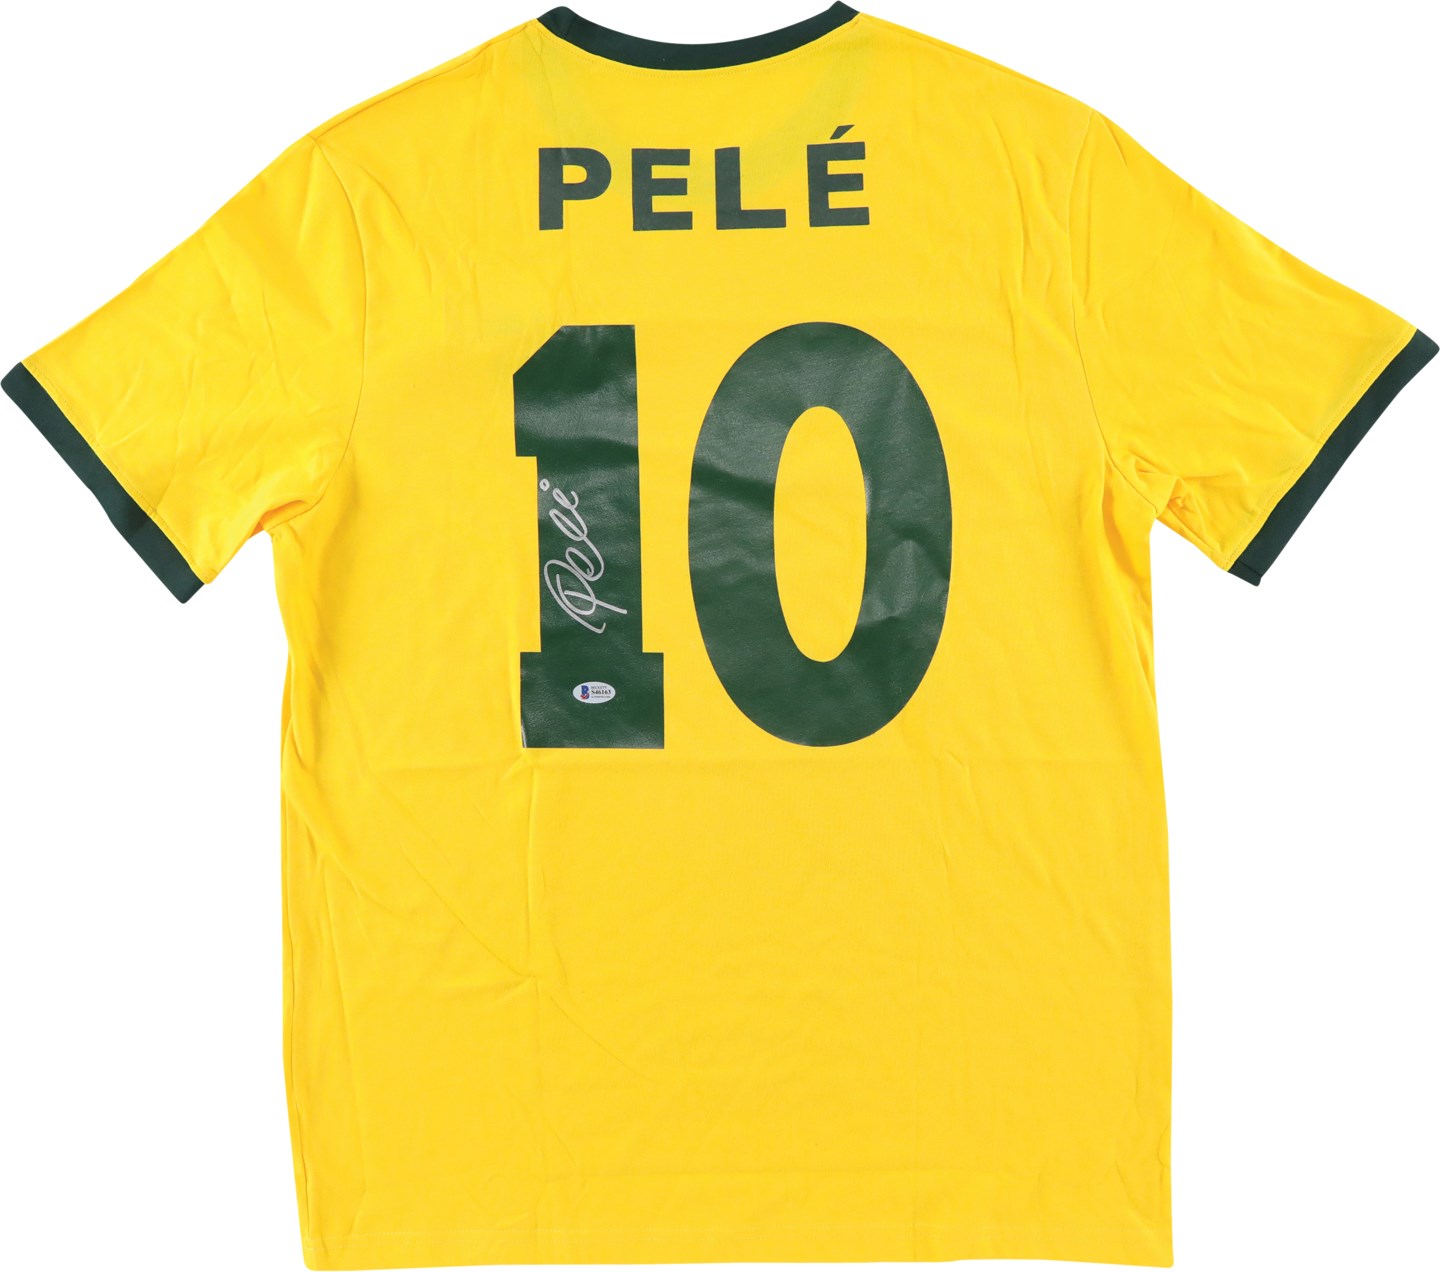 Olympics and All Sports - Pele Signed Brazil Jersey (Beckett)